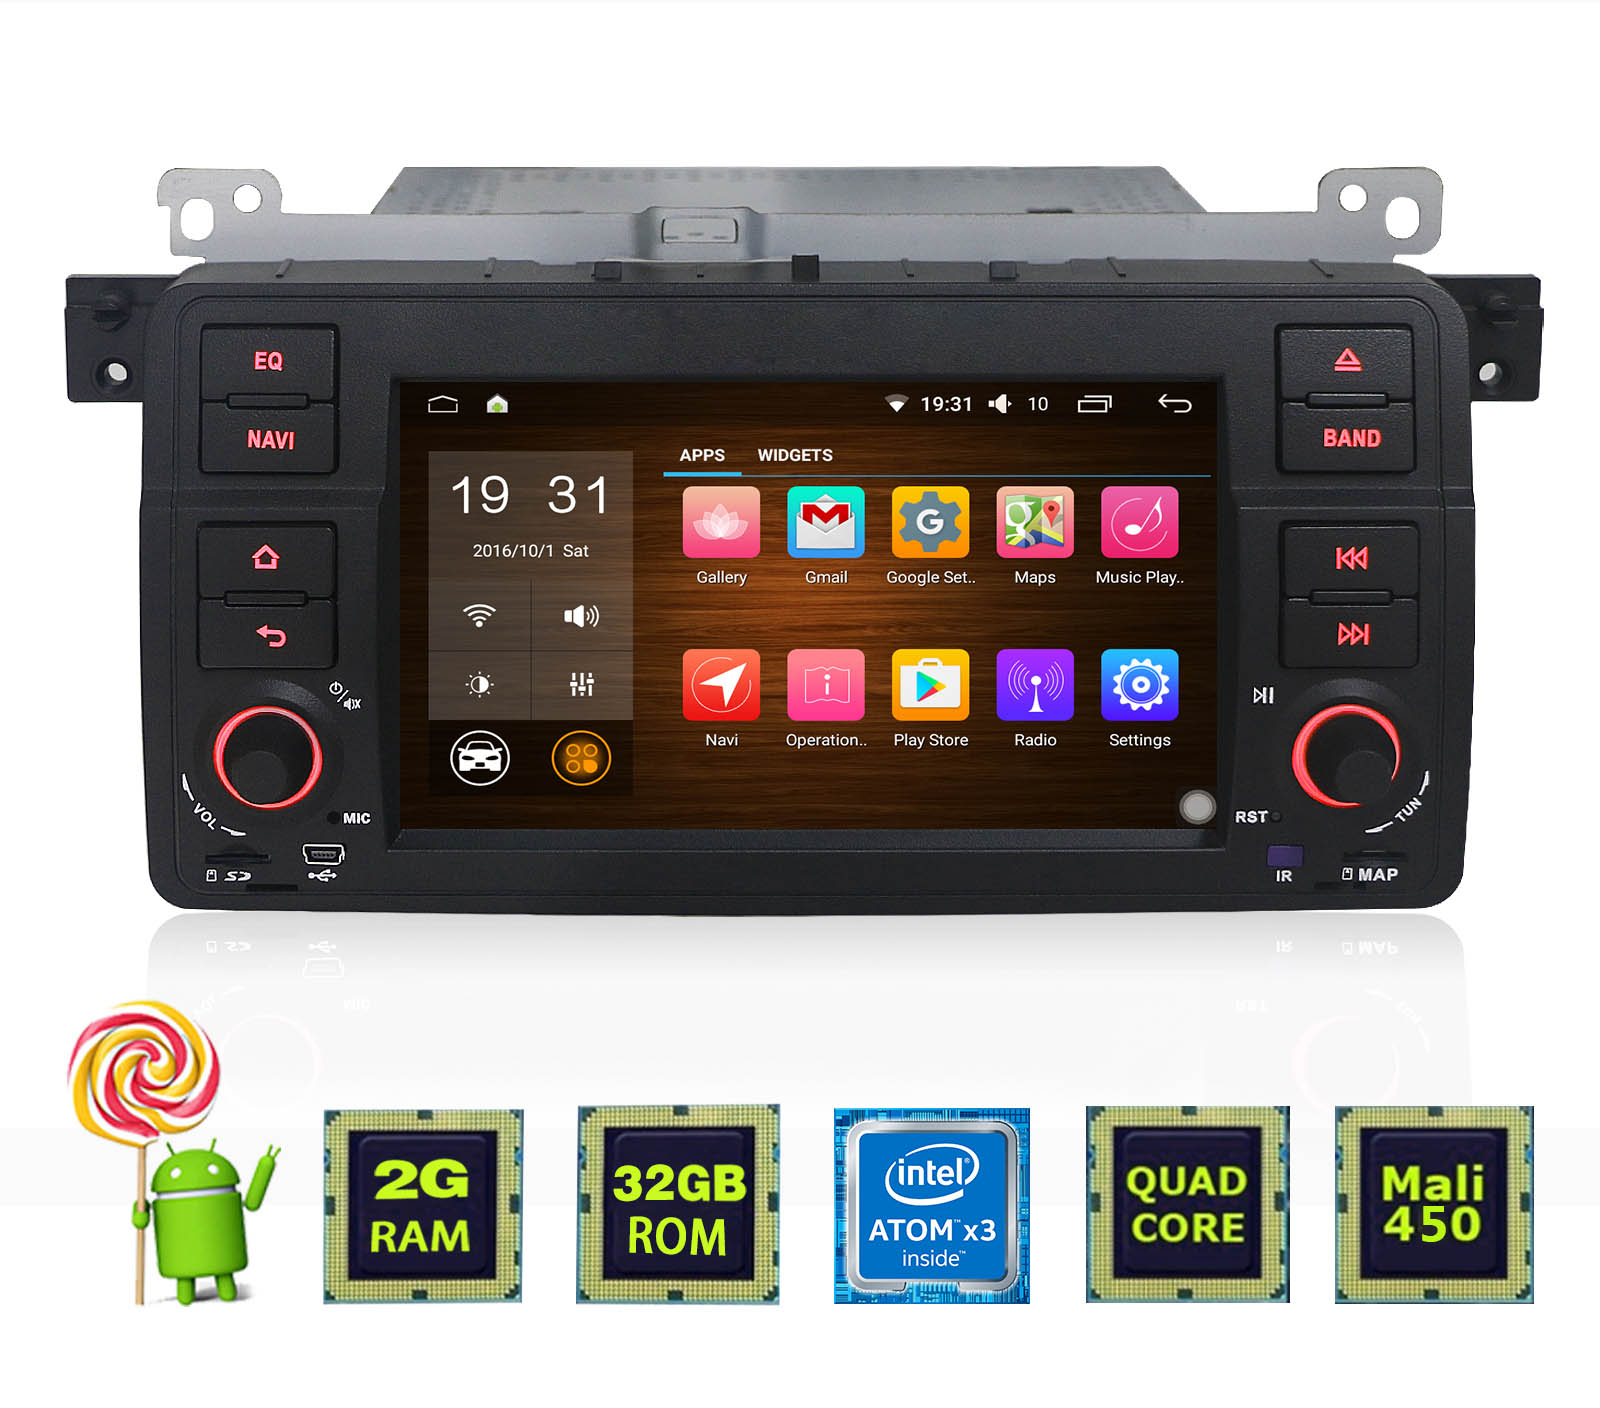 JOYING 2GB BMW E46 Android Car Radio has been available in